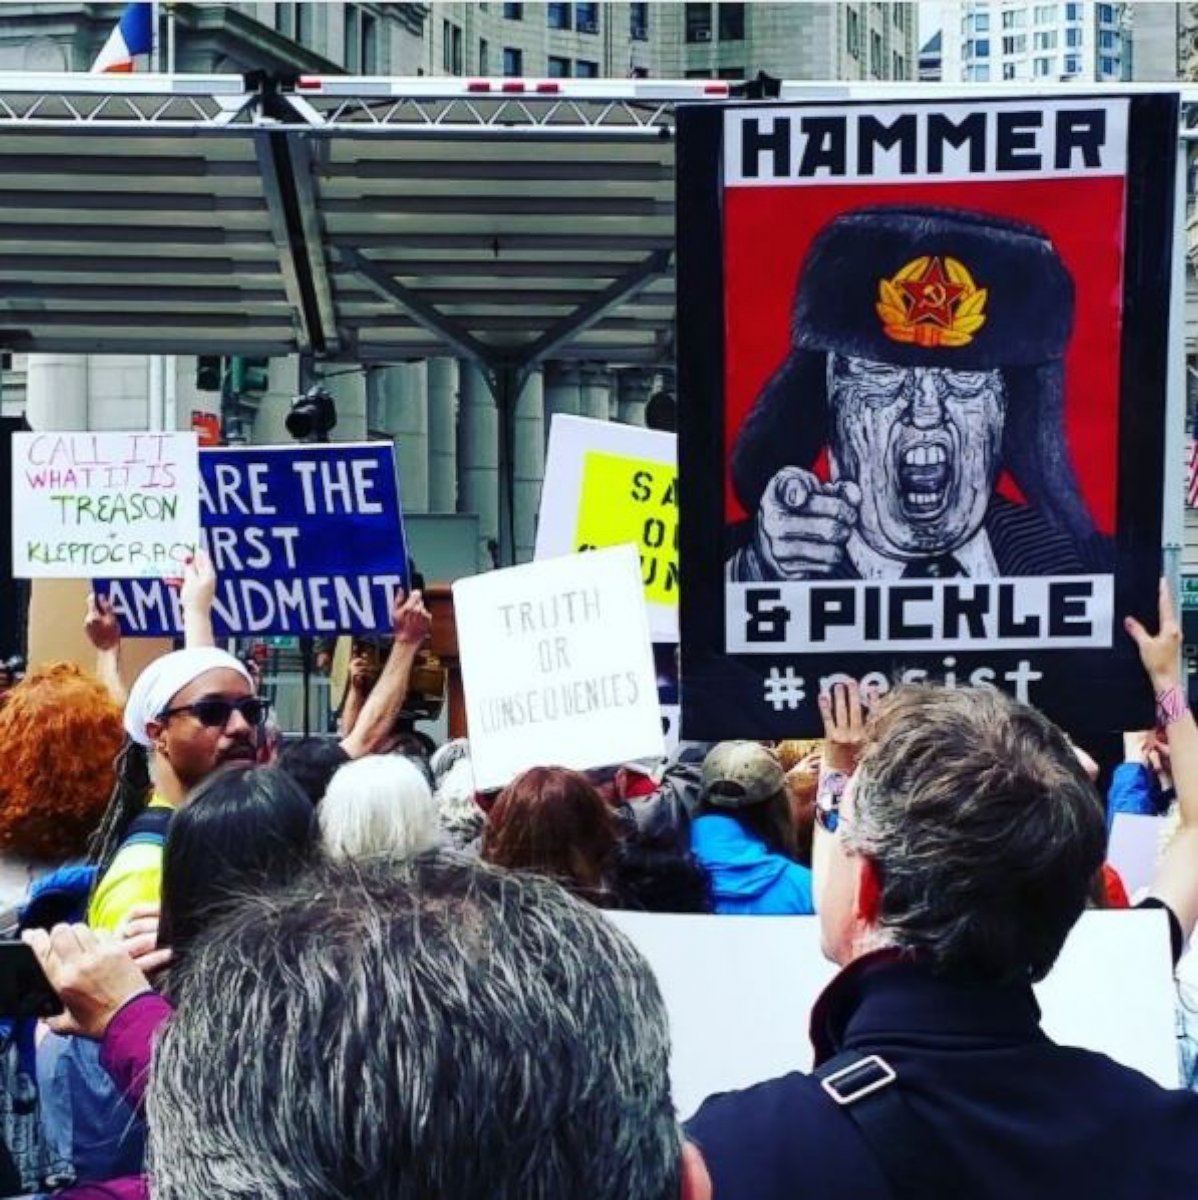 PHOTO: Anthony McGowen posted this image to Instagram on June 3, 2017 with the caption, "Live at the ....March for Truth."